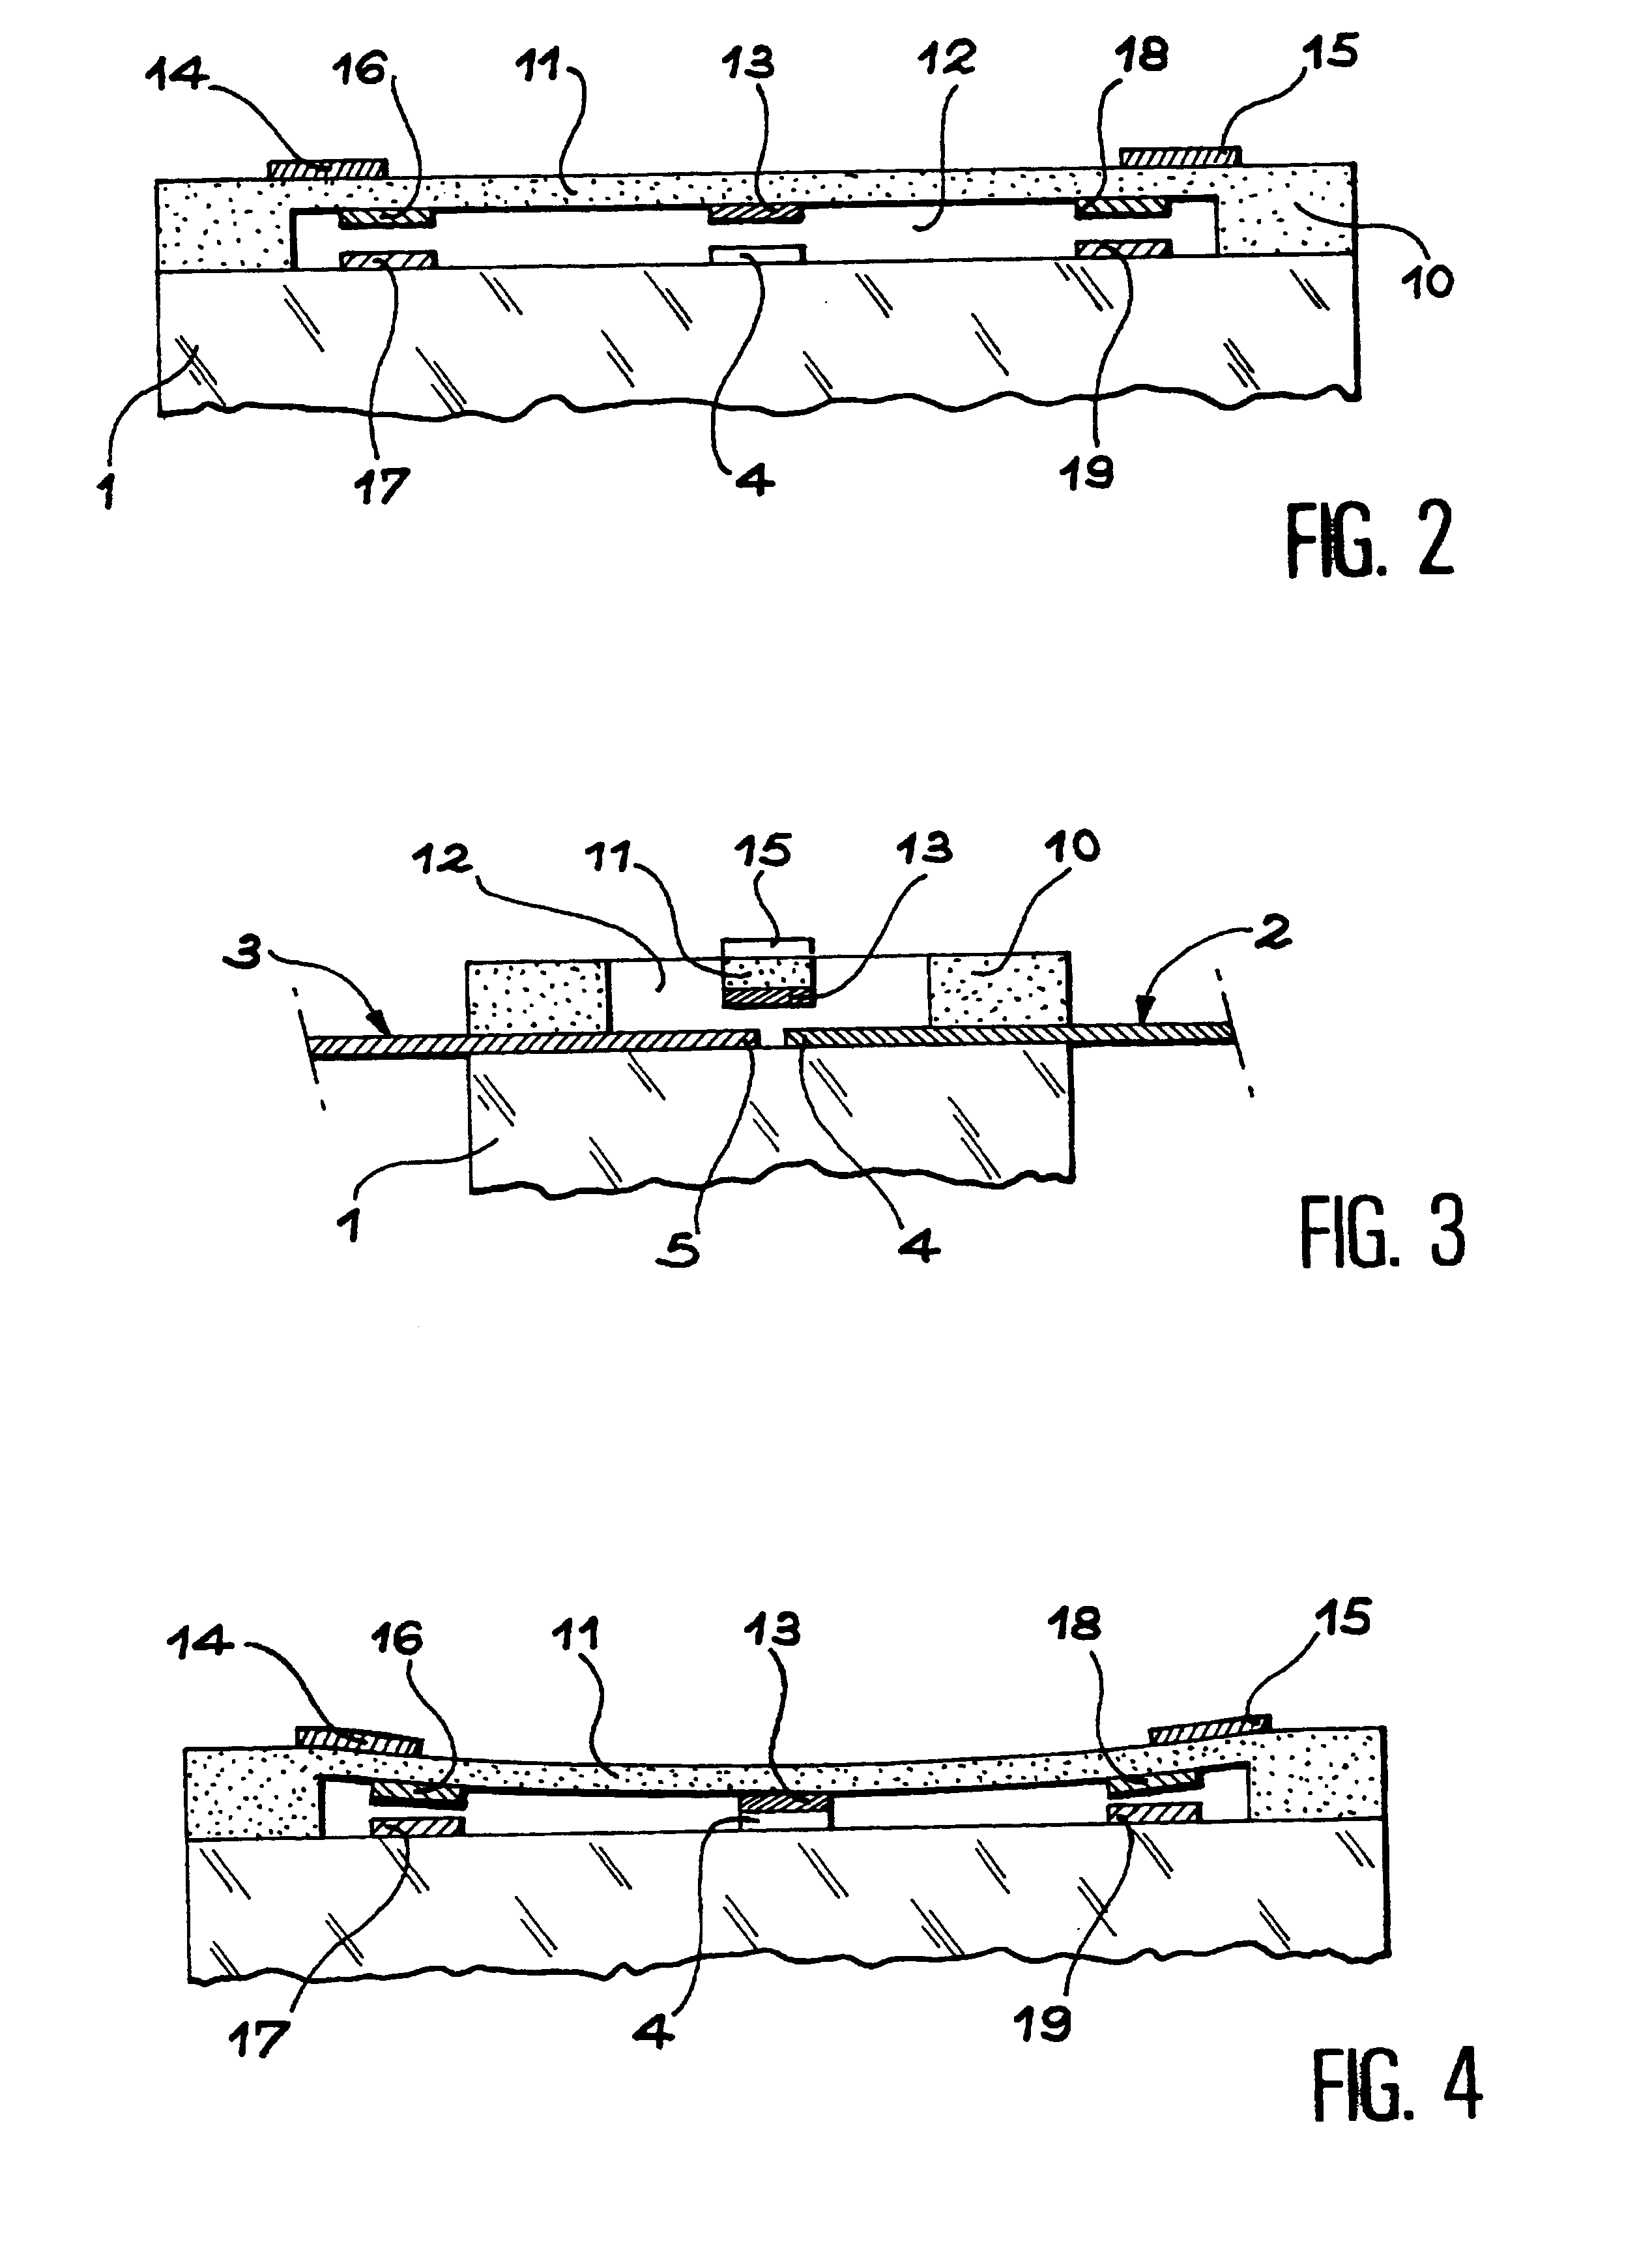 Micro-device with thermal actuator